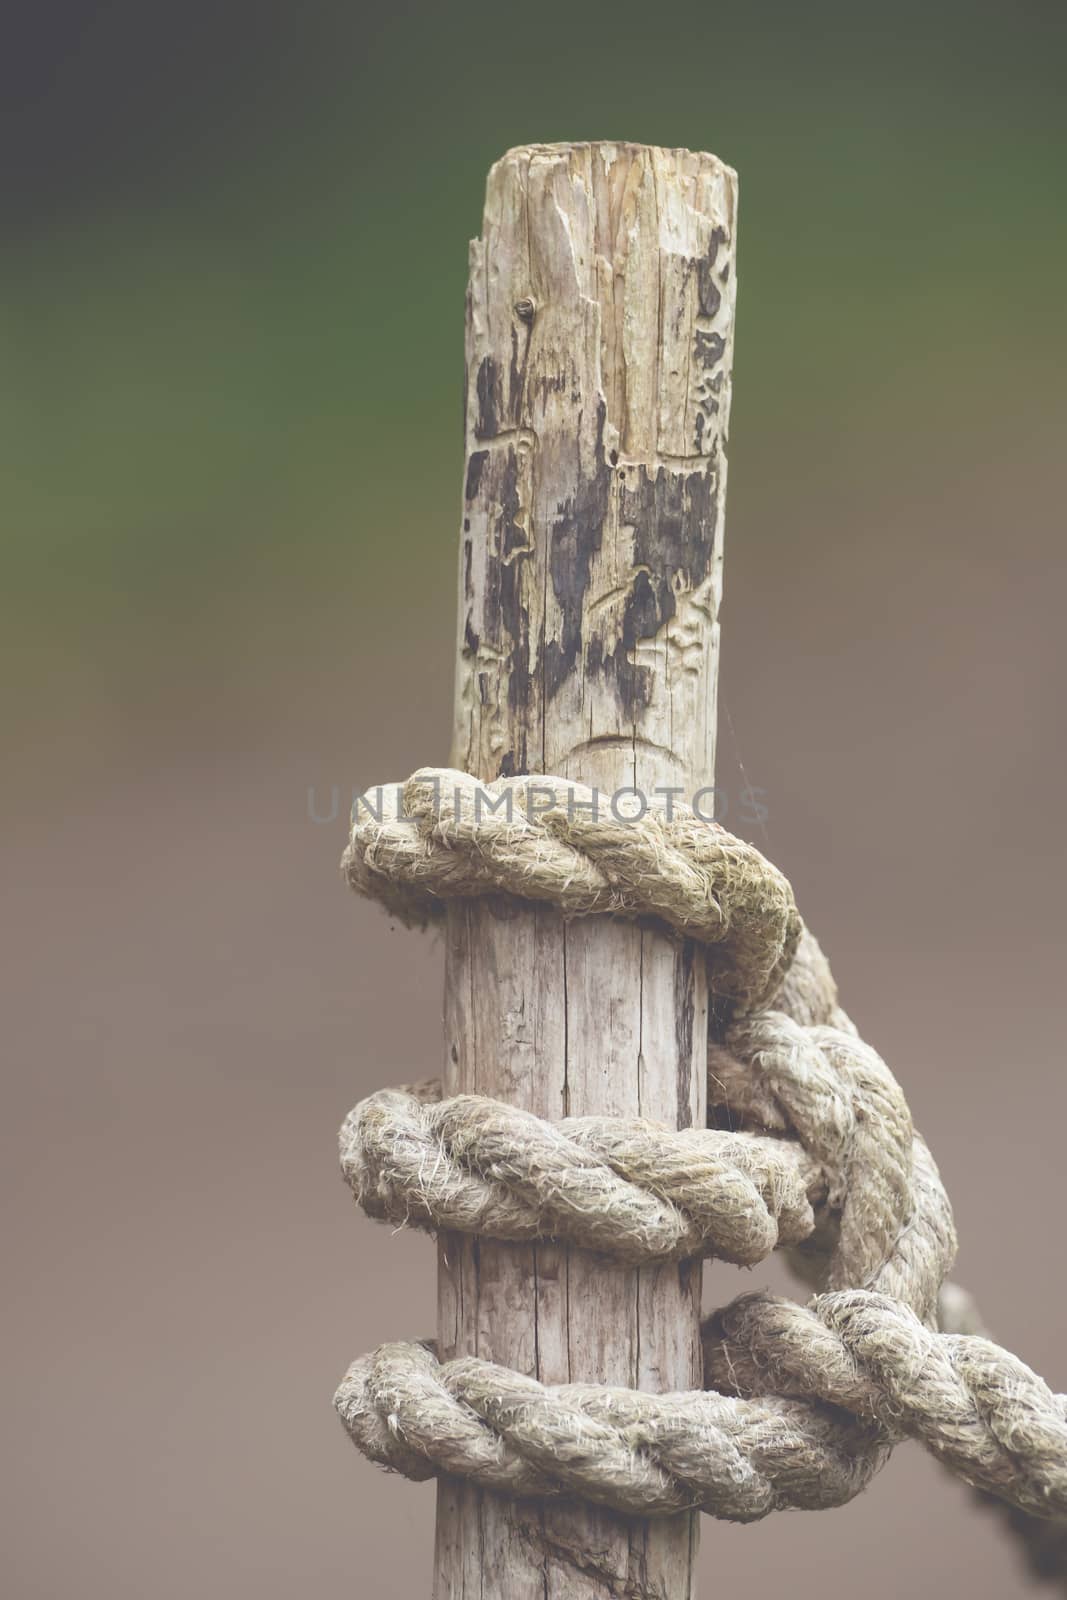 Knot from a rope on a wood by sandra_fotodesign